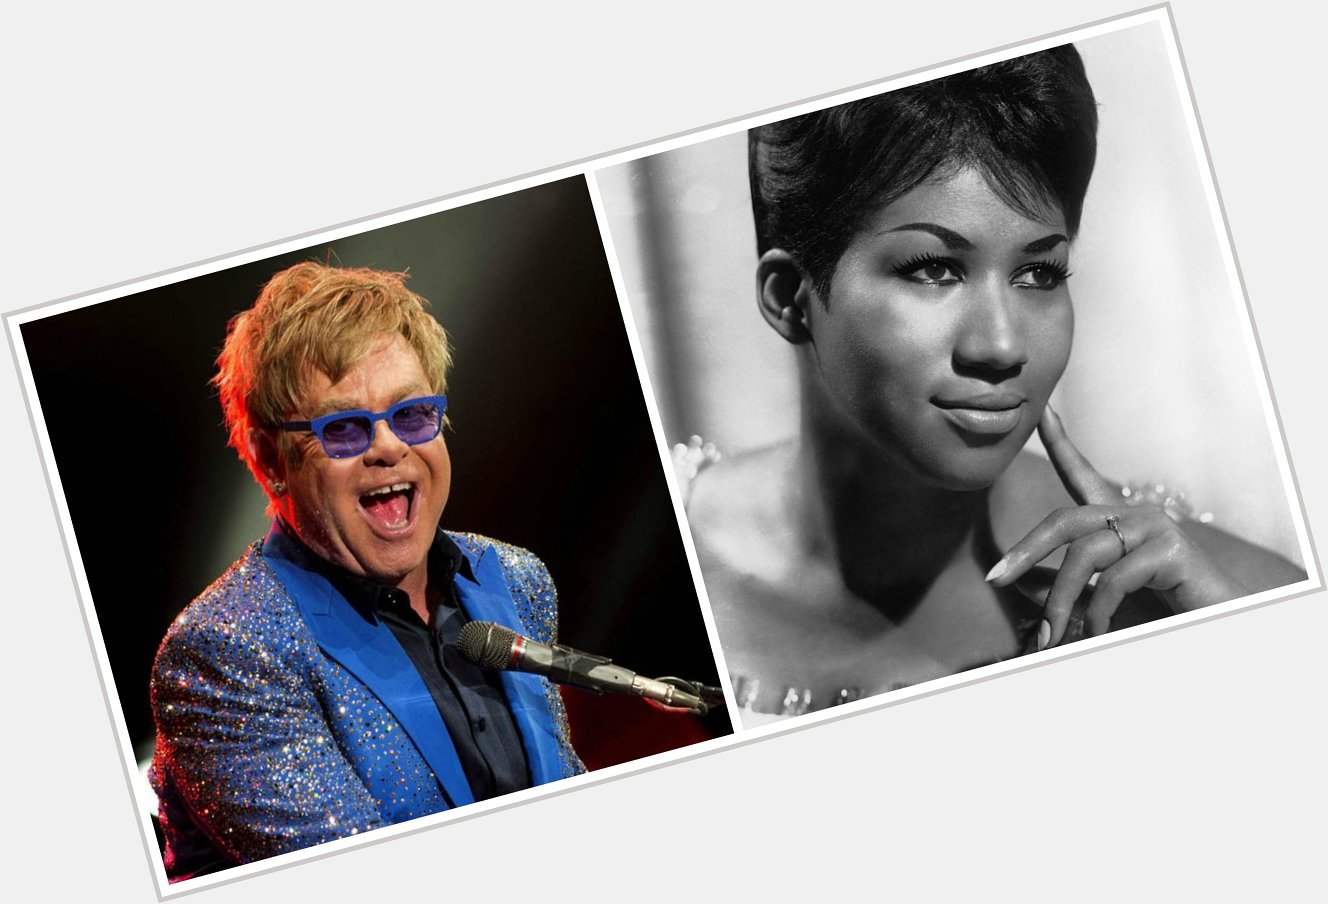 Happy Birthday Elton John & Aretha Franklin.

Elton probably throws a better party but who\s music would you rather? 